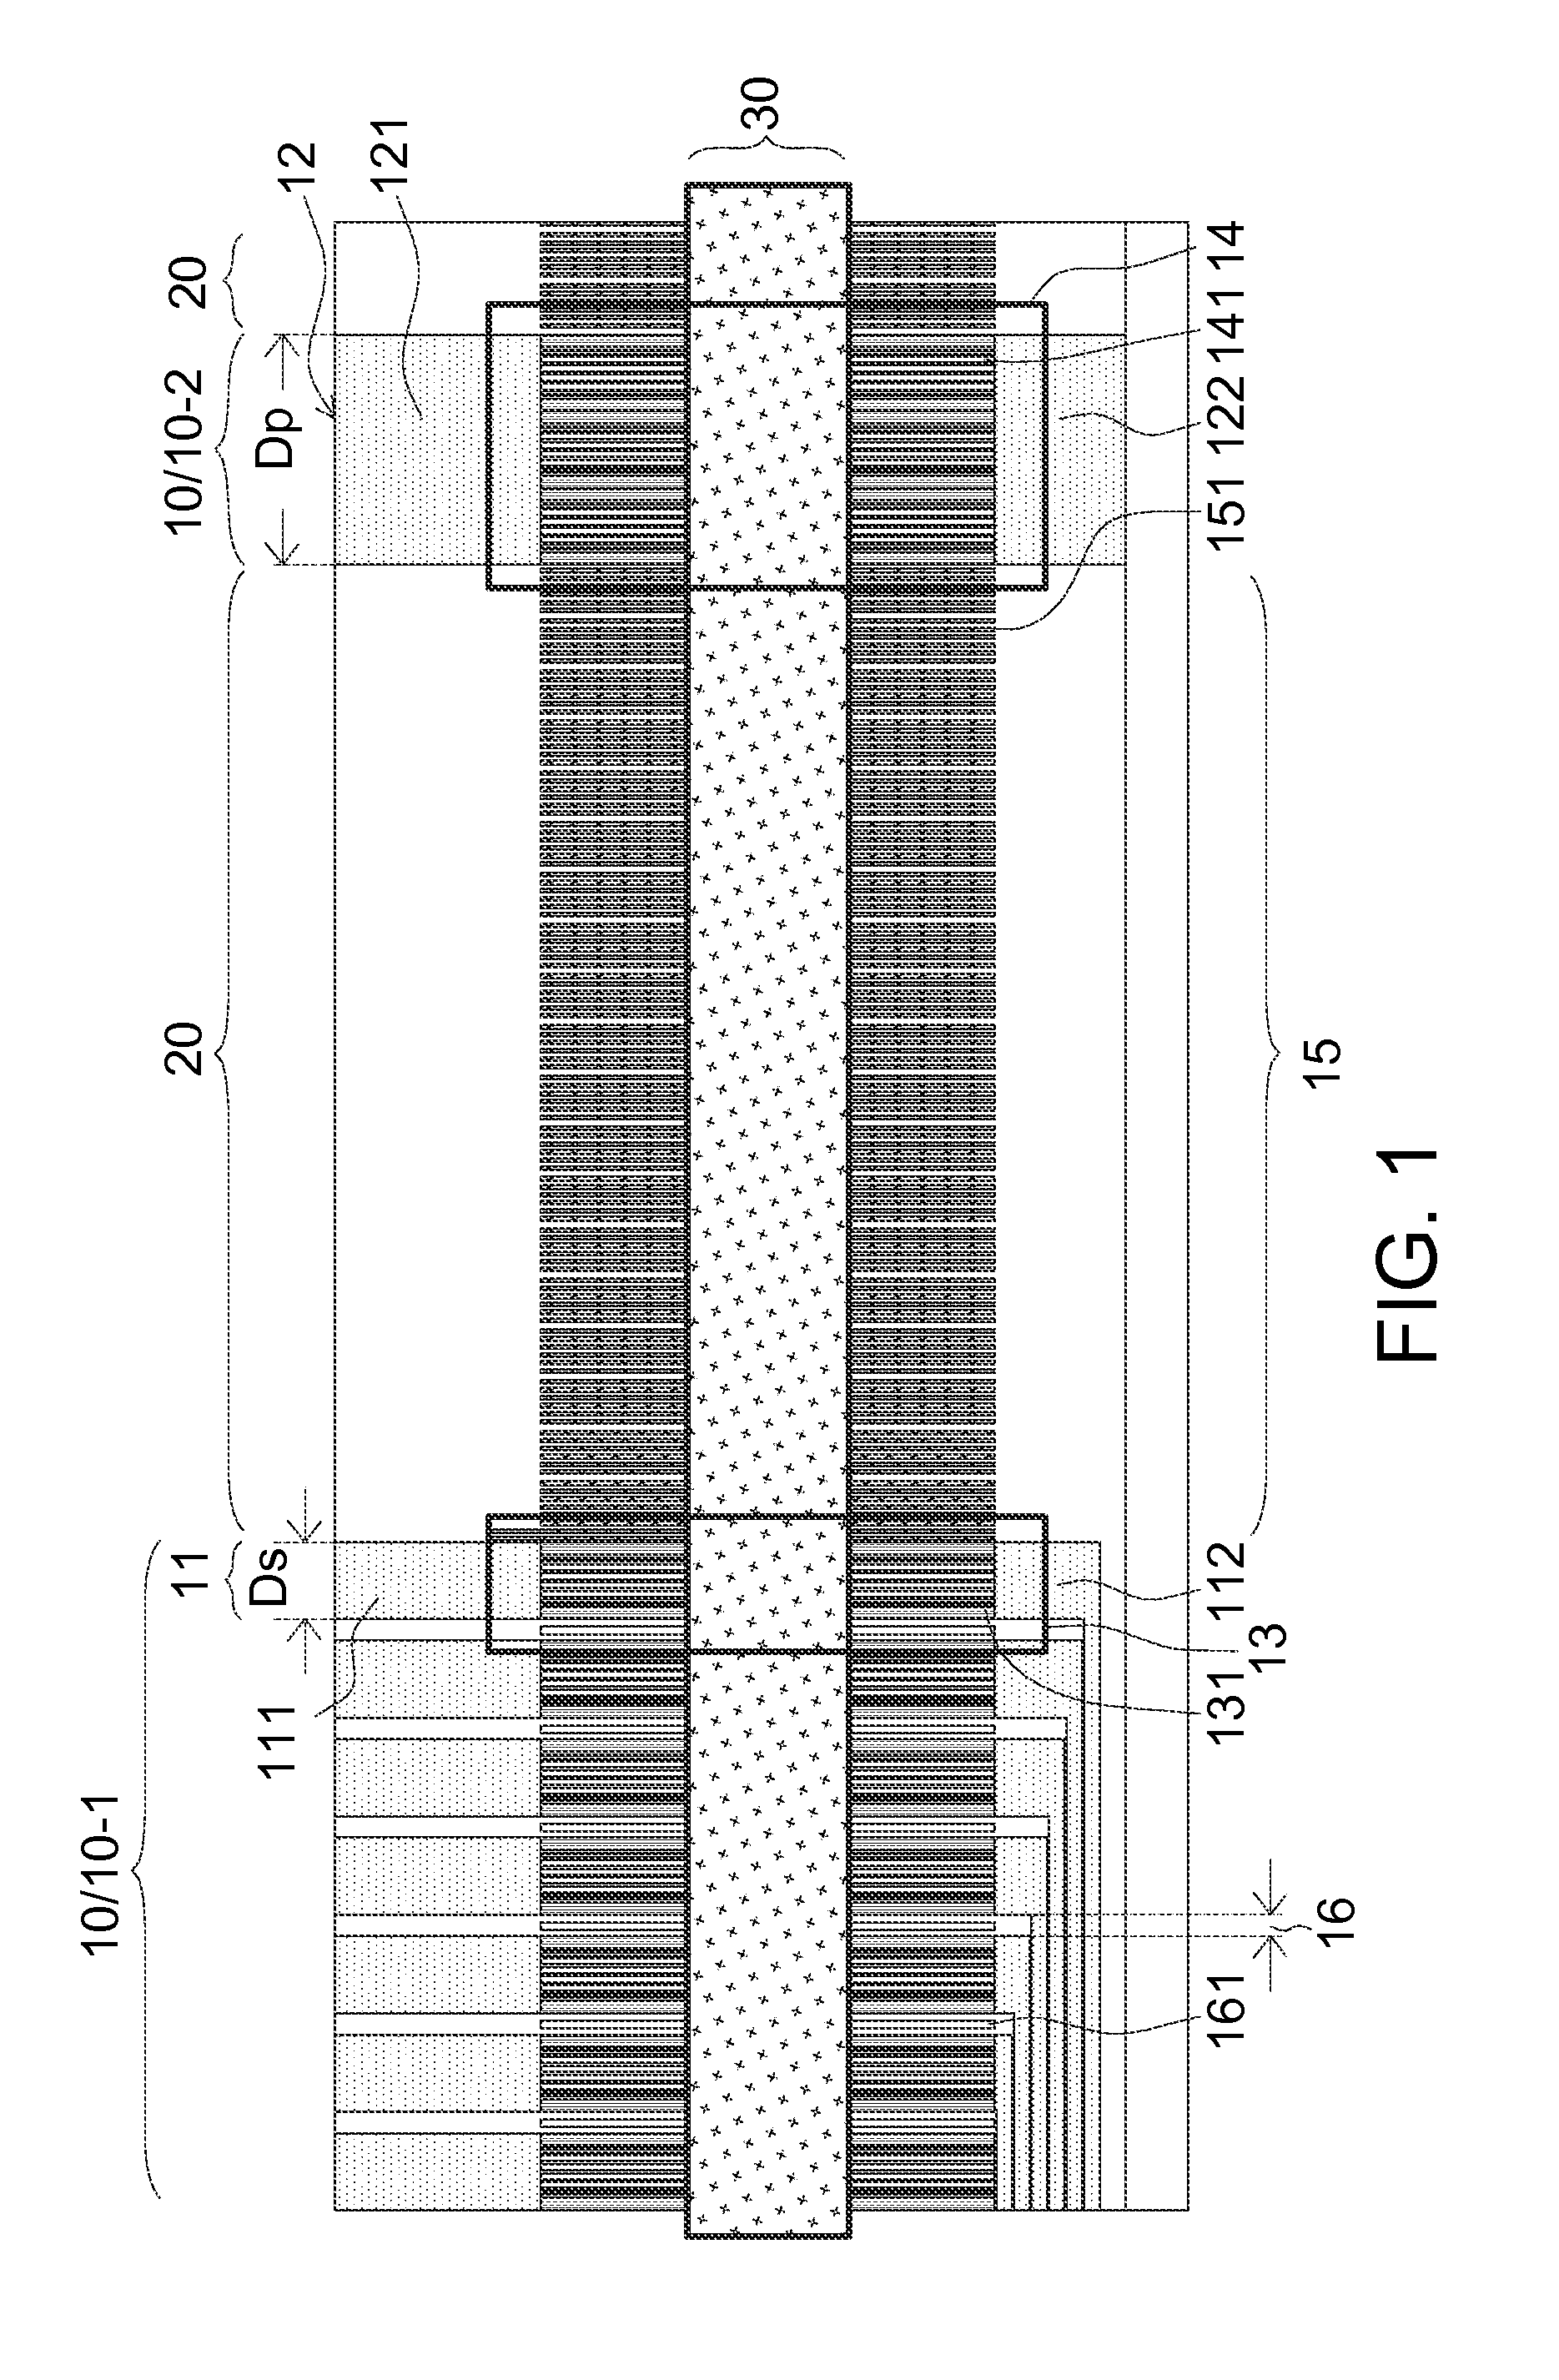 Display panel with varying conductive pattern zone